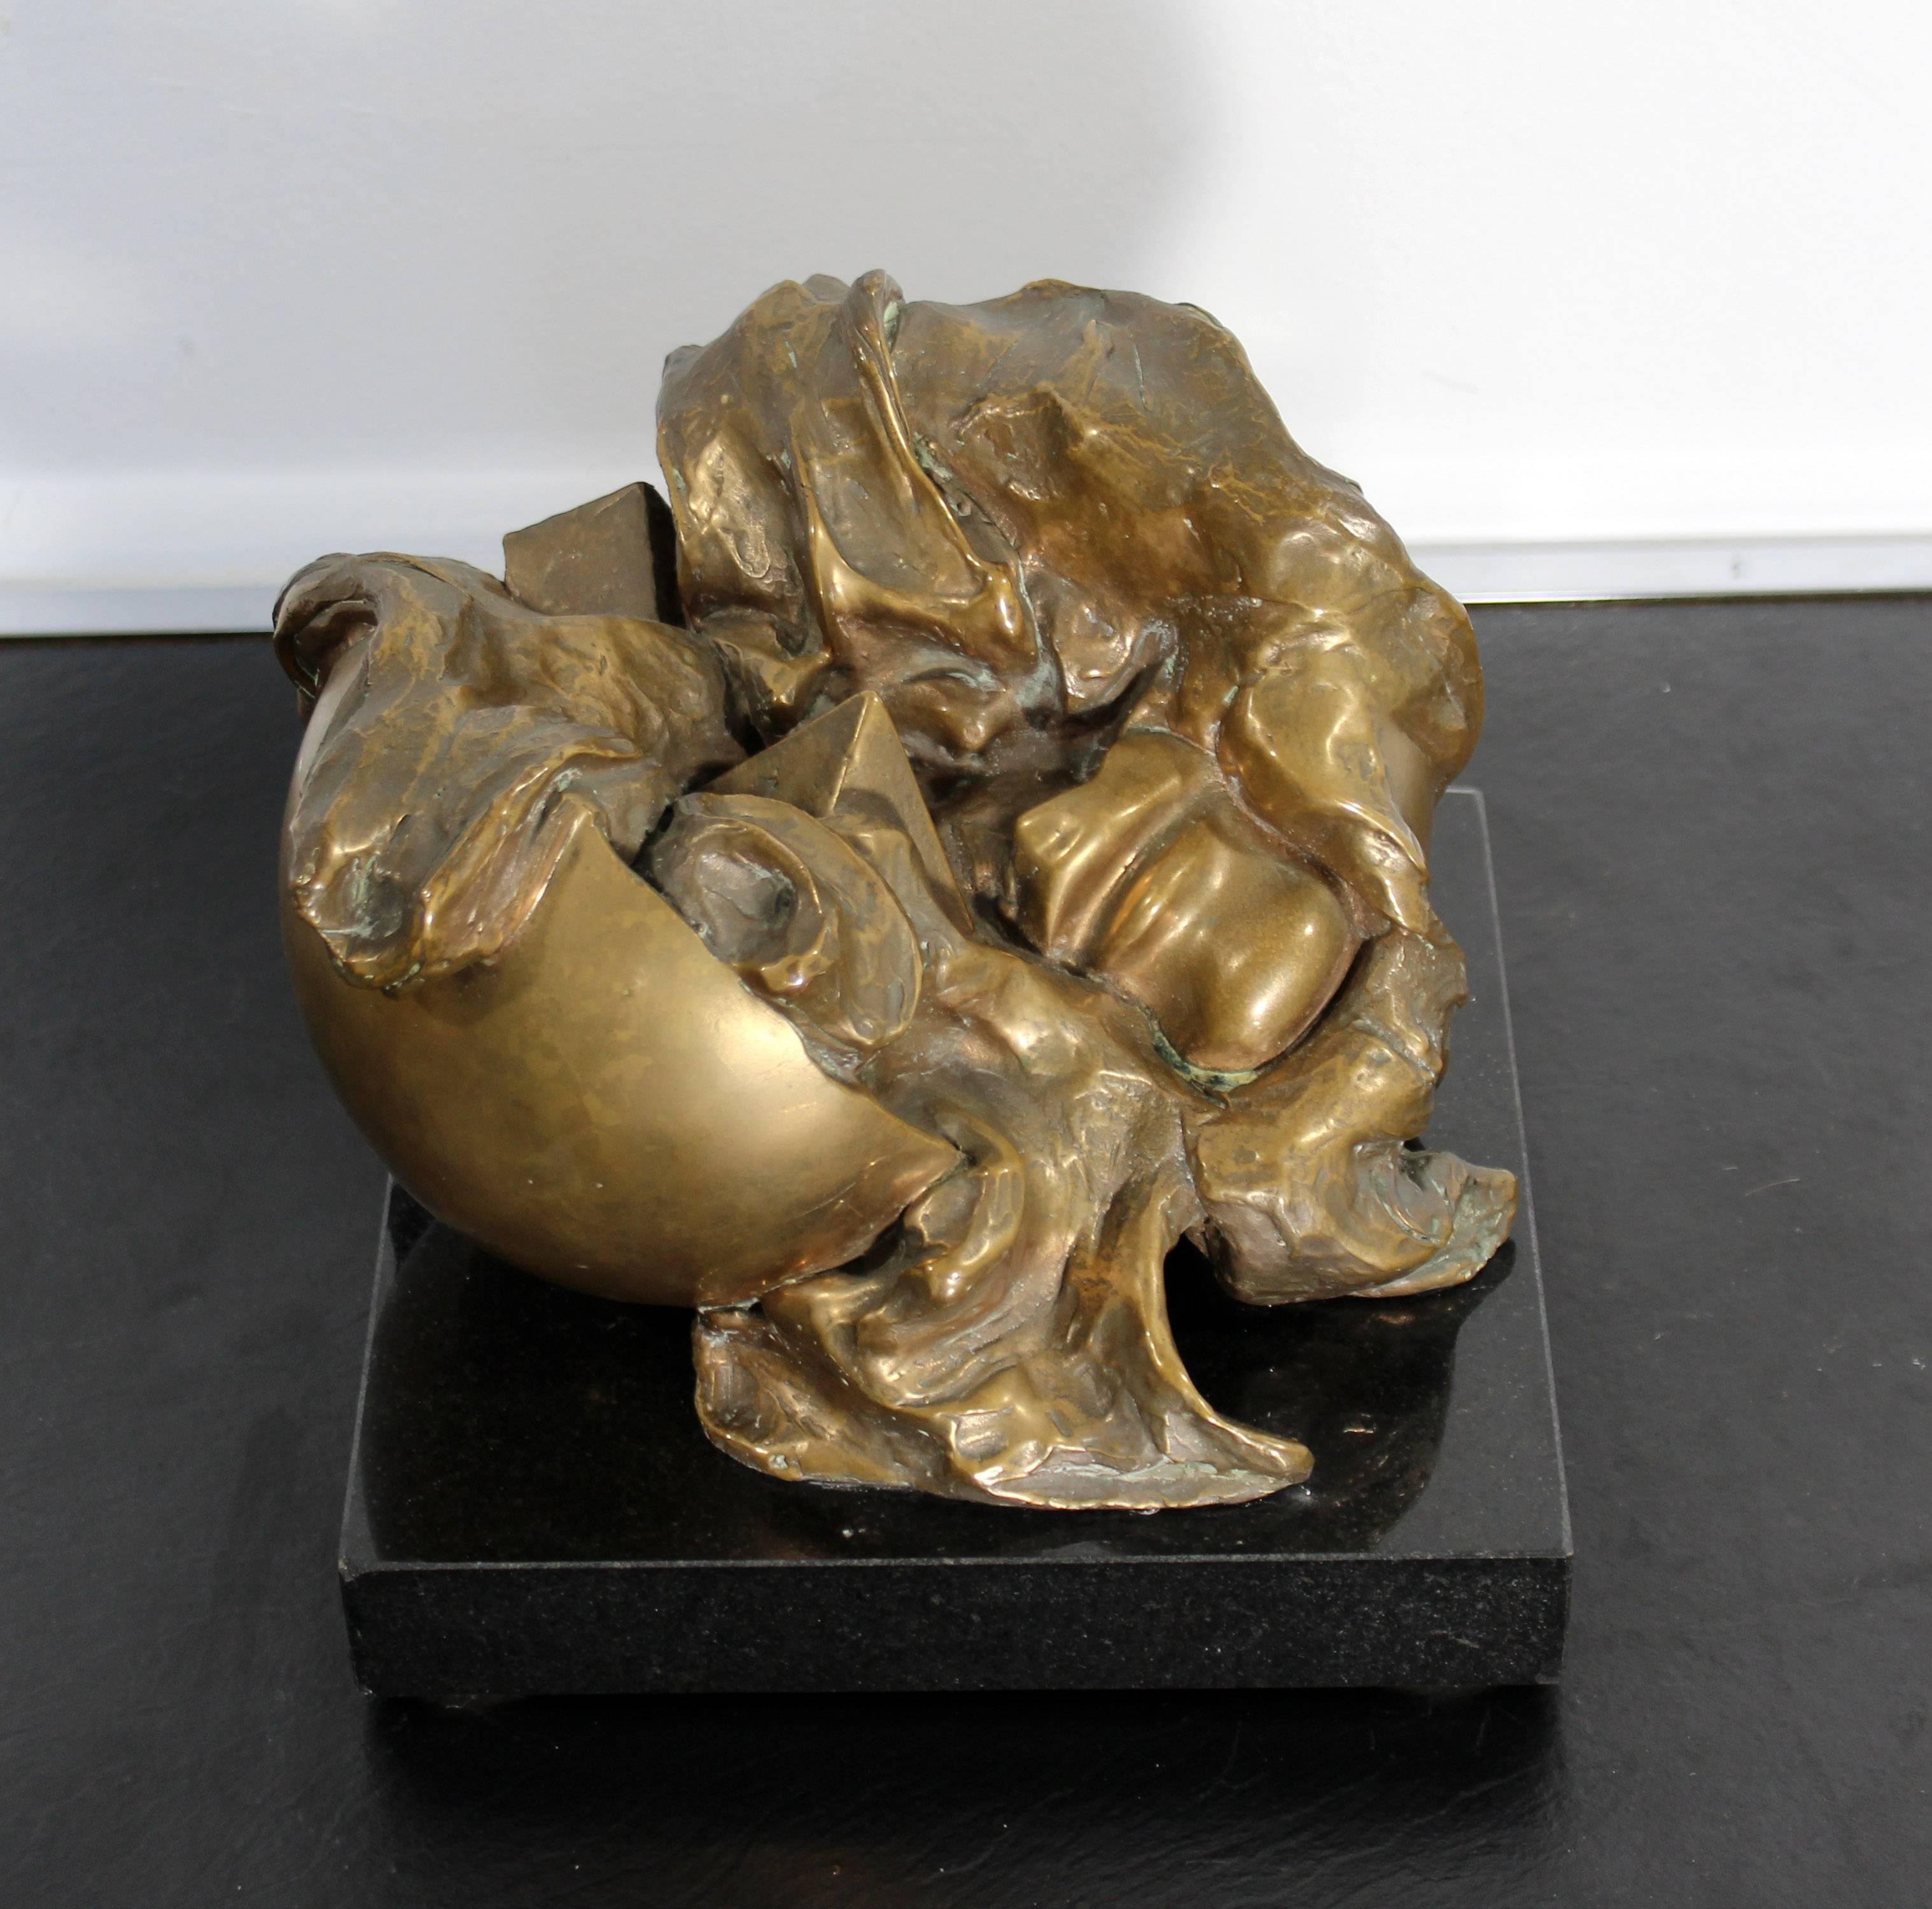 For your consideration is an absolutely entrancing, Surrealist, bronze table sculpture, signed and numbered 13/60 by Jens Flemming Sorensen. In excellent condition. The dimensions are 8